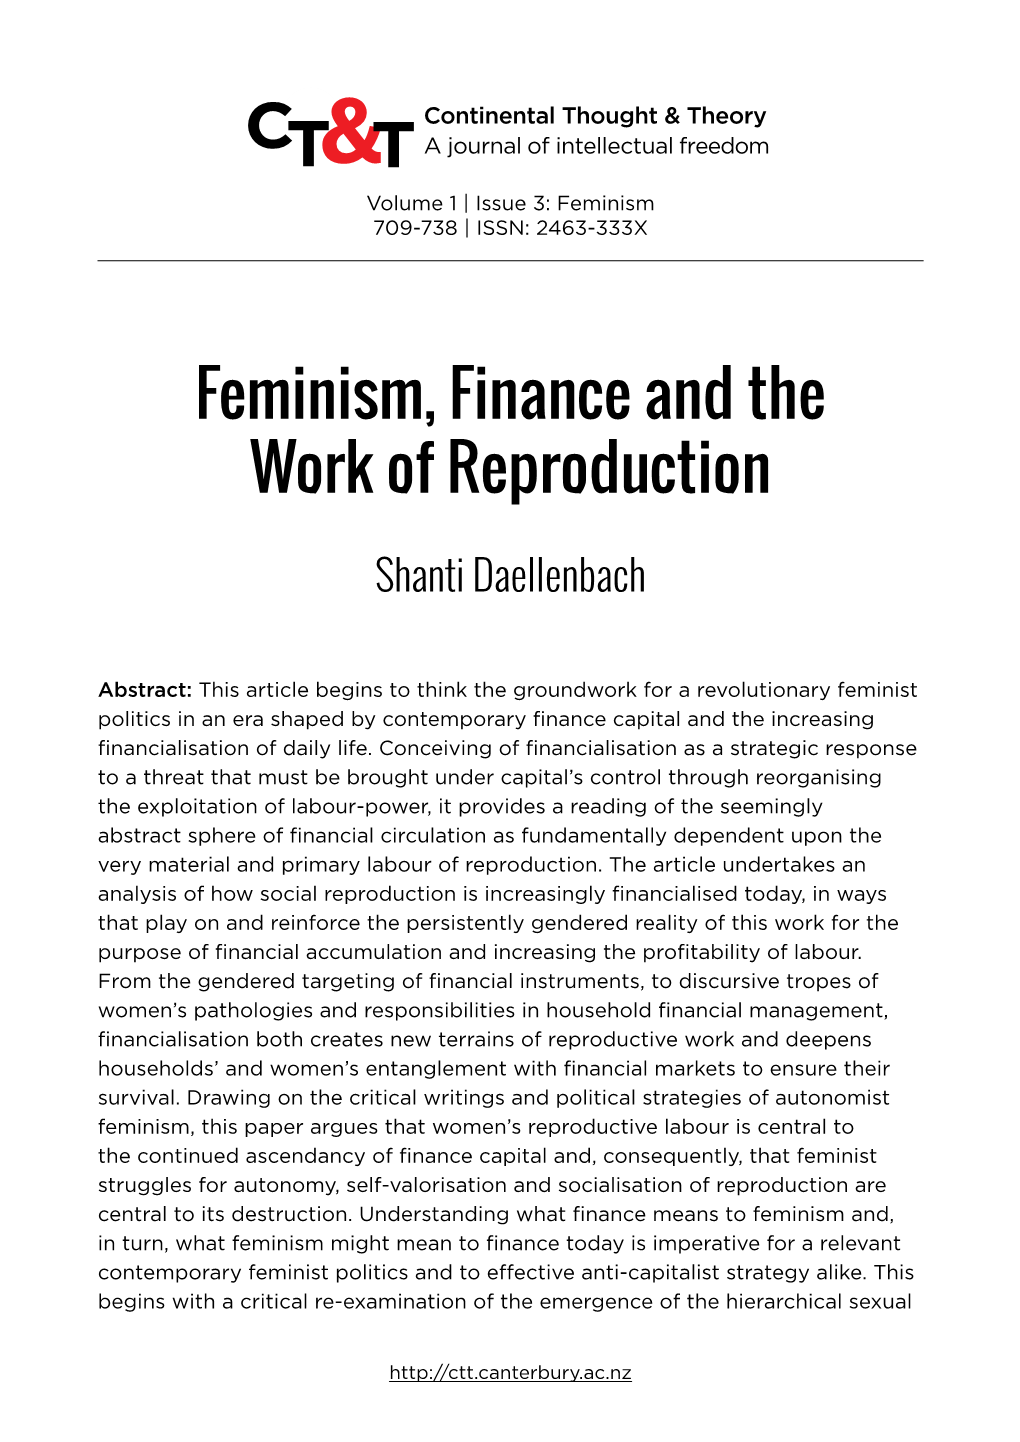 Feminism, Finance and the Work of Reproduction